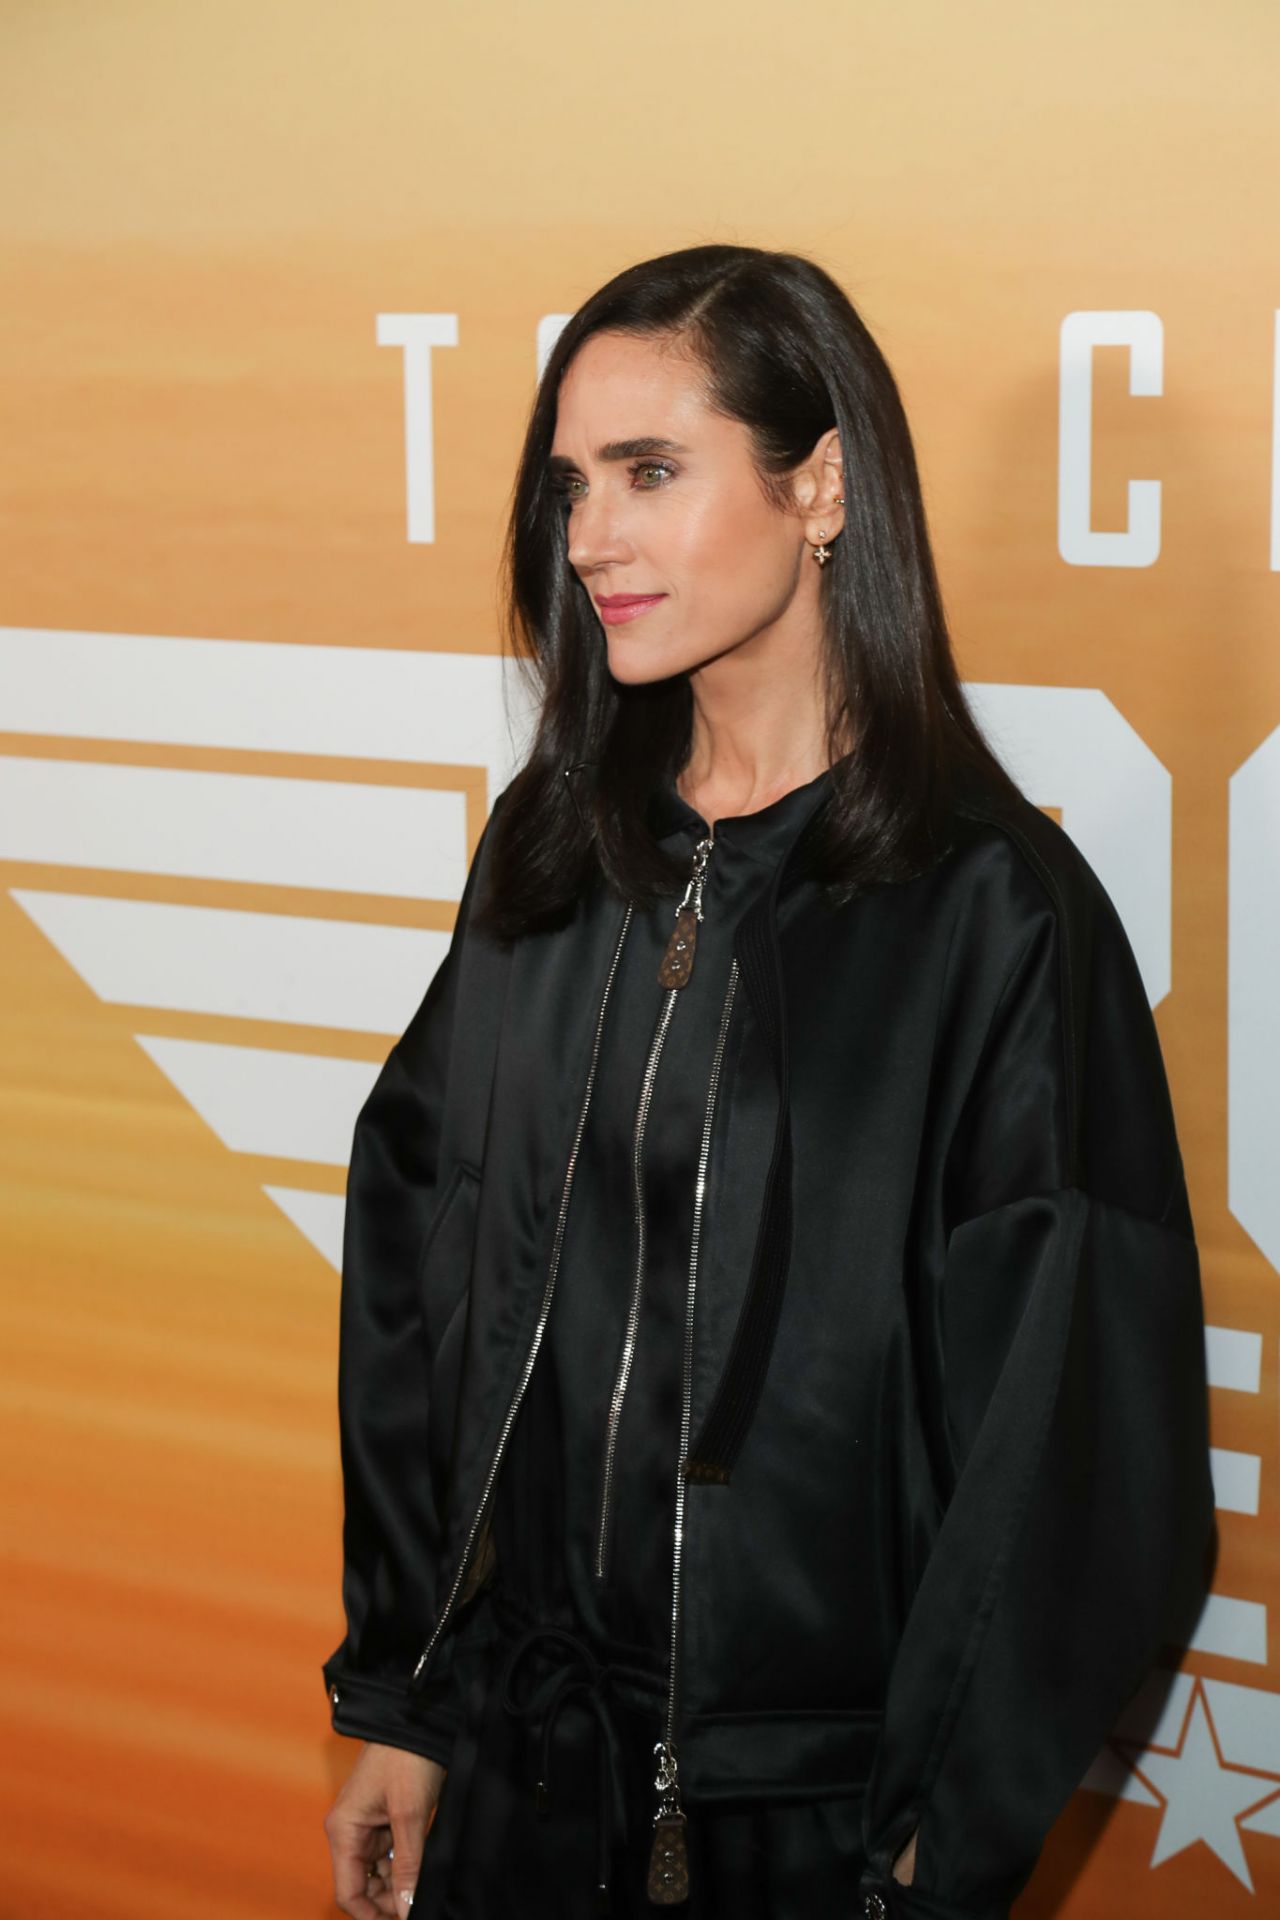 UK STYLE Magazine May 2022: JENNIFER CONNELLY COVER FEATURE Top Gun -  YourCelebrityMagazines